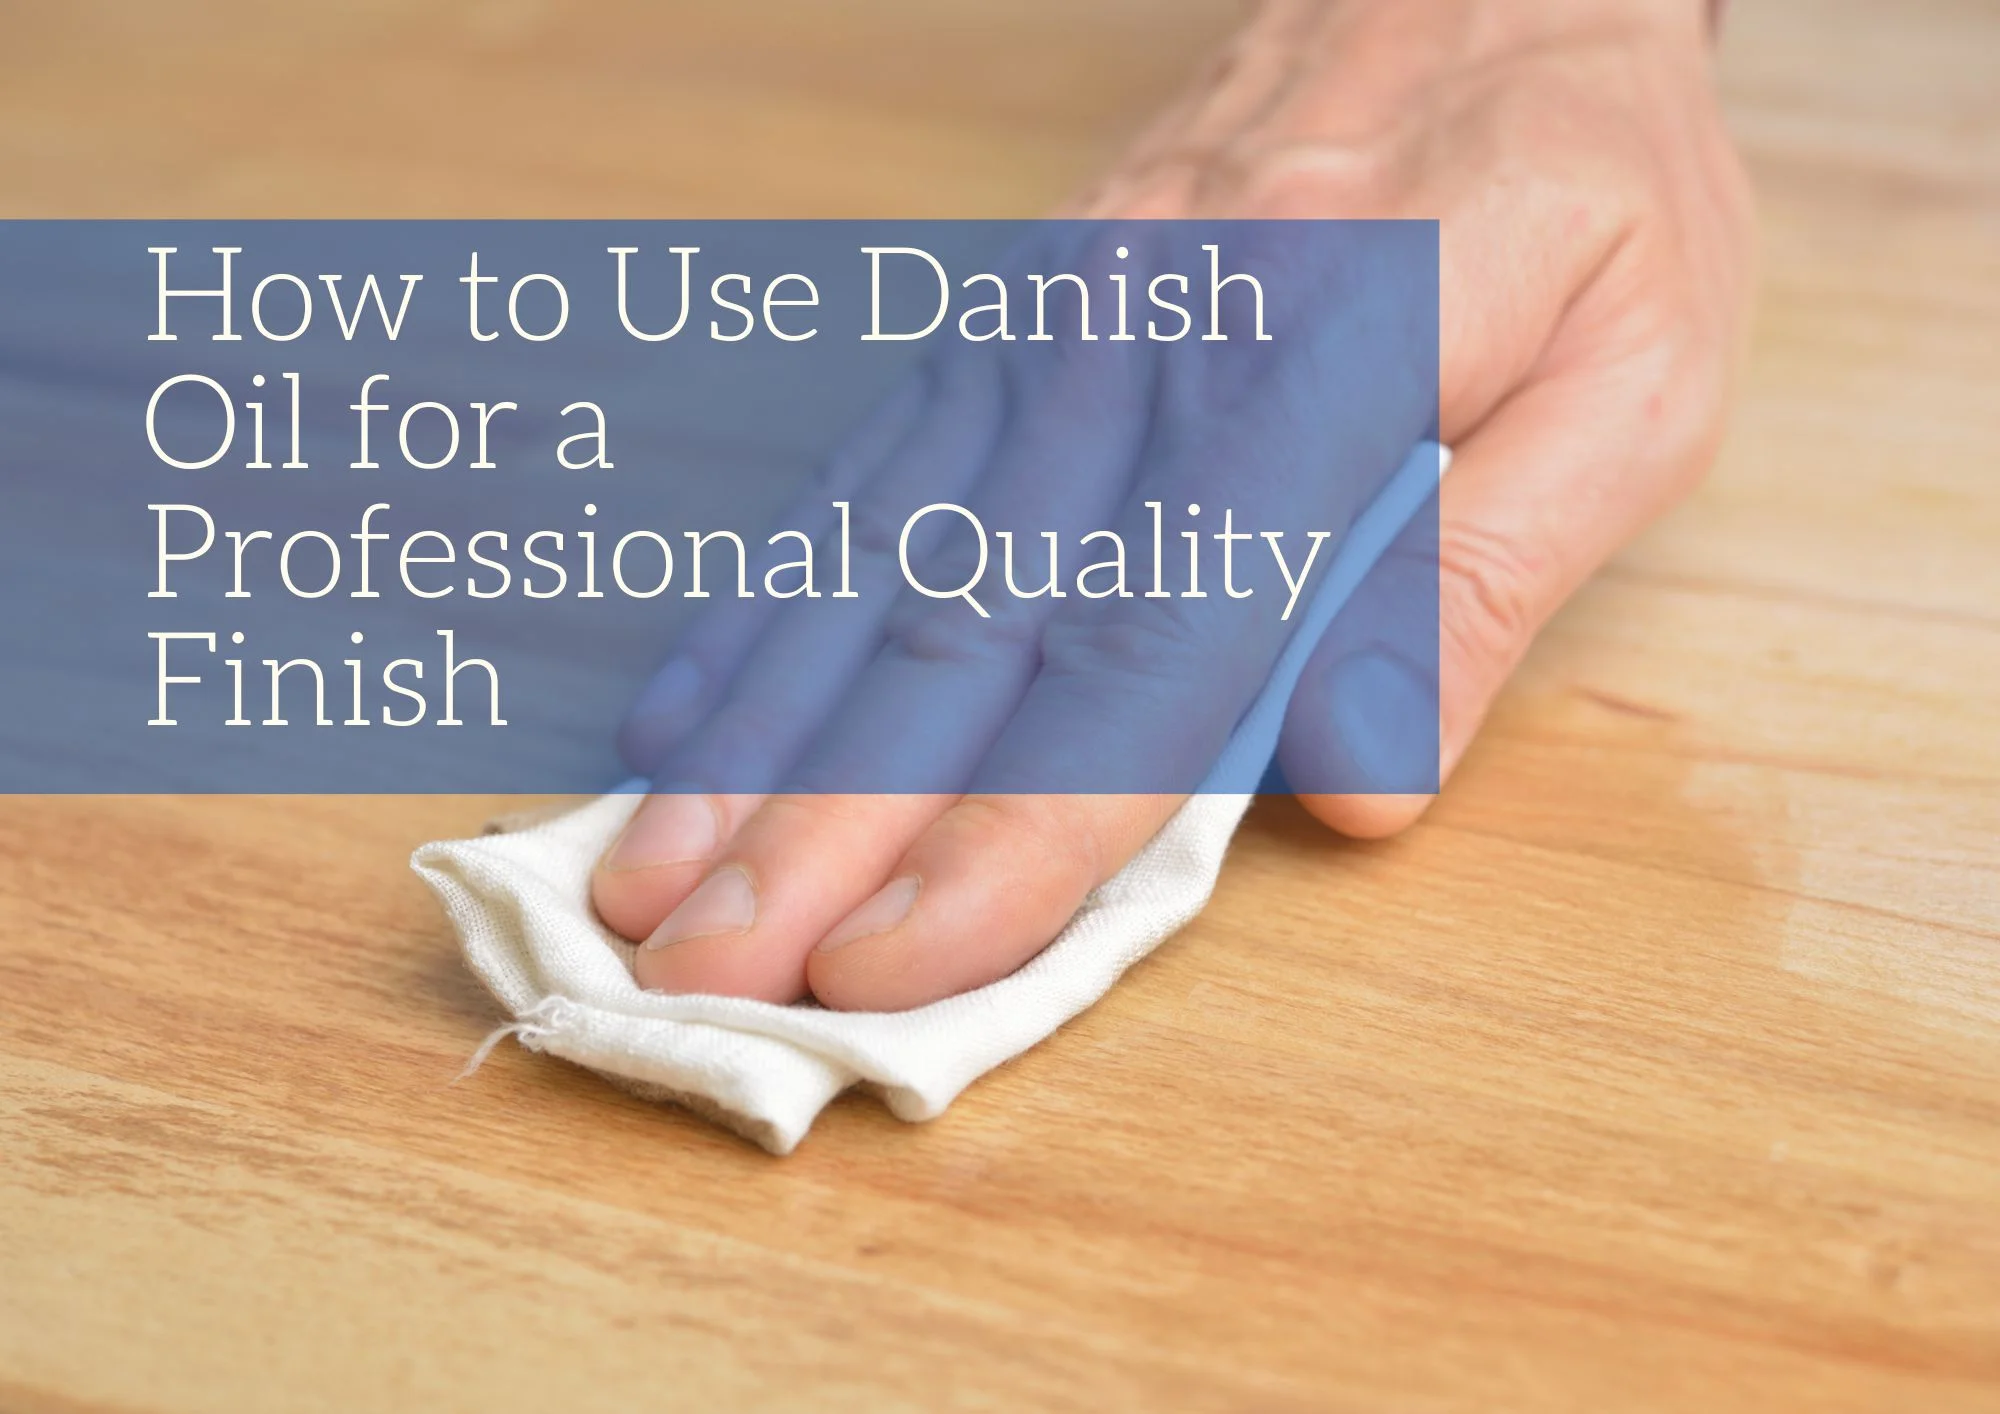 How to Use Danish Oil for a Professional Quality Finish